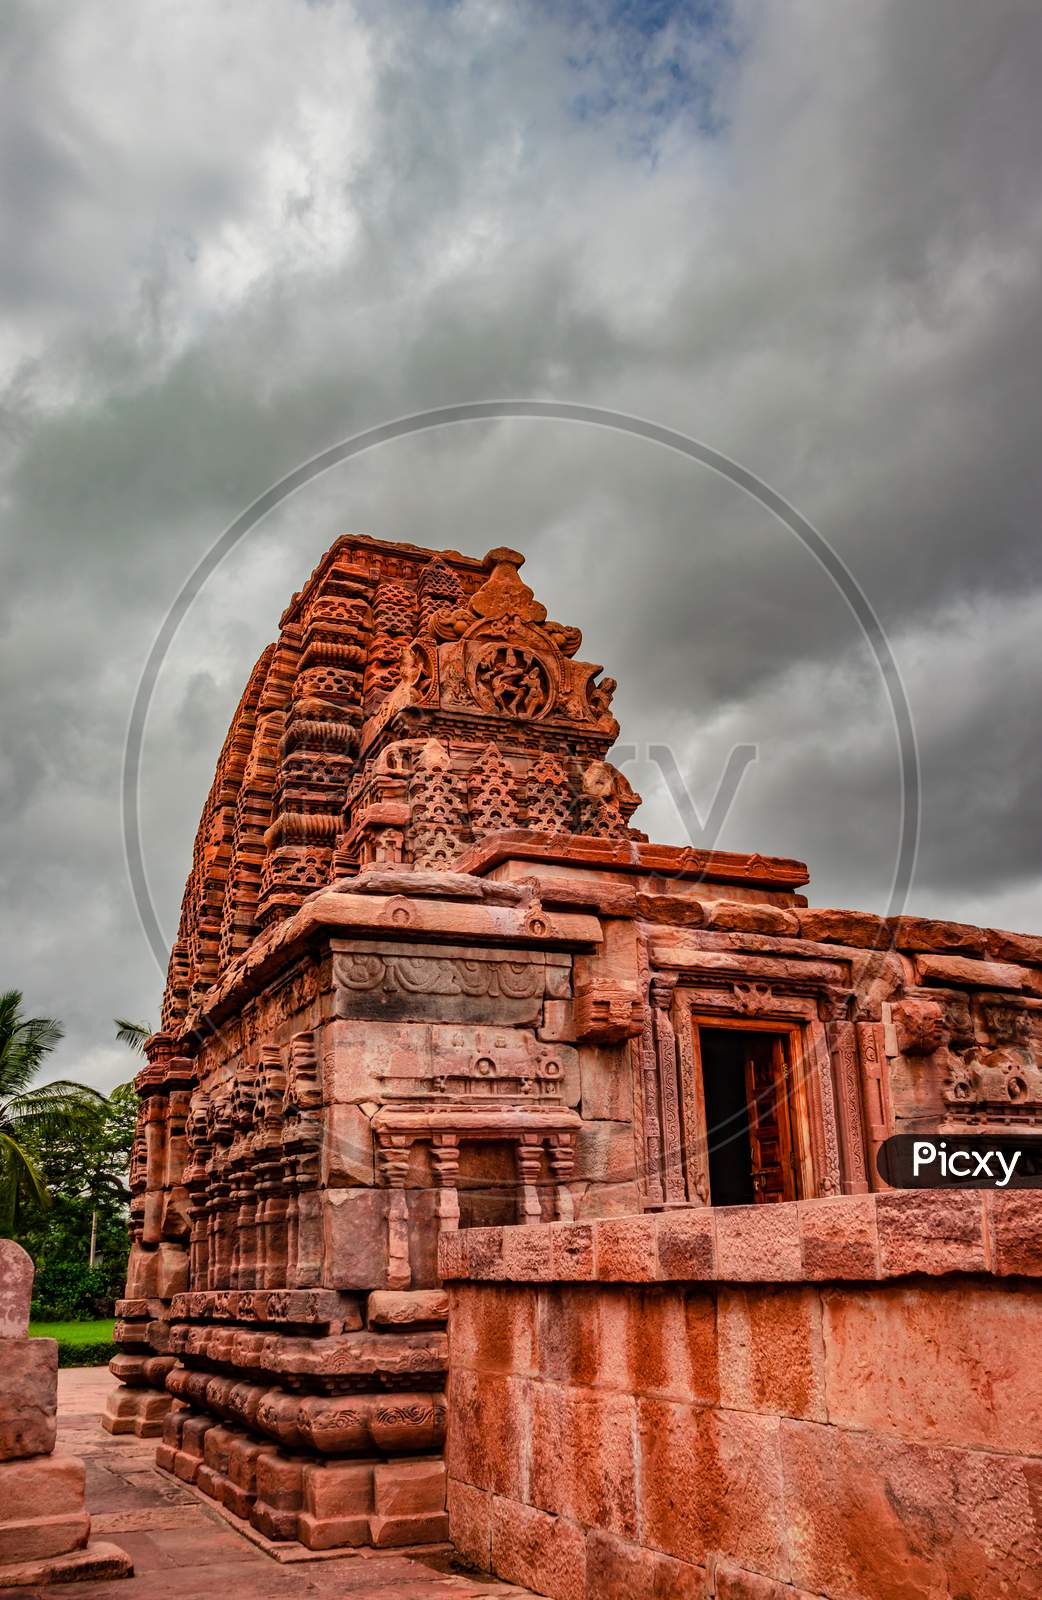 Galaganatha Temple Pattadakal Breathtaking Stone Art From Different Angle With Dramatic Sky